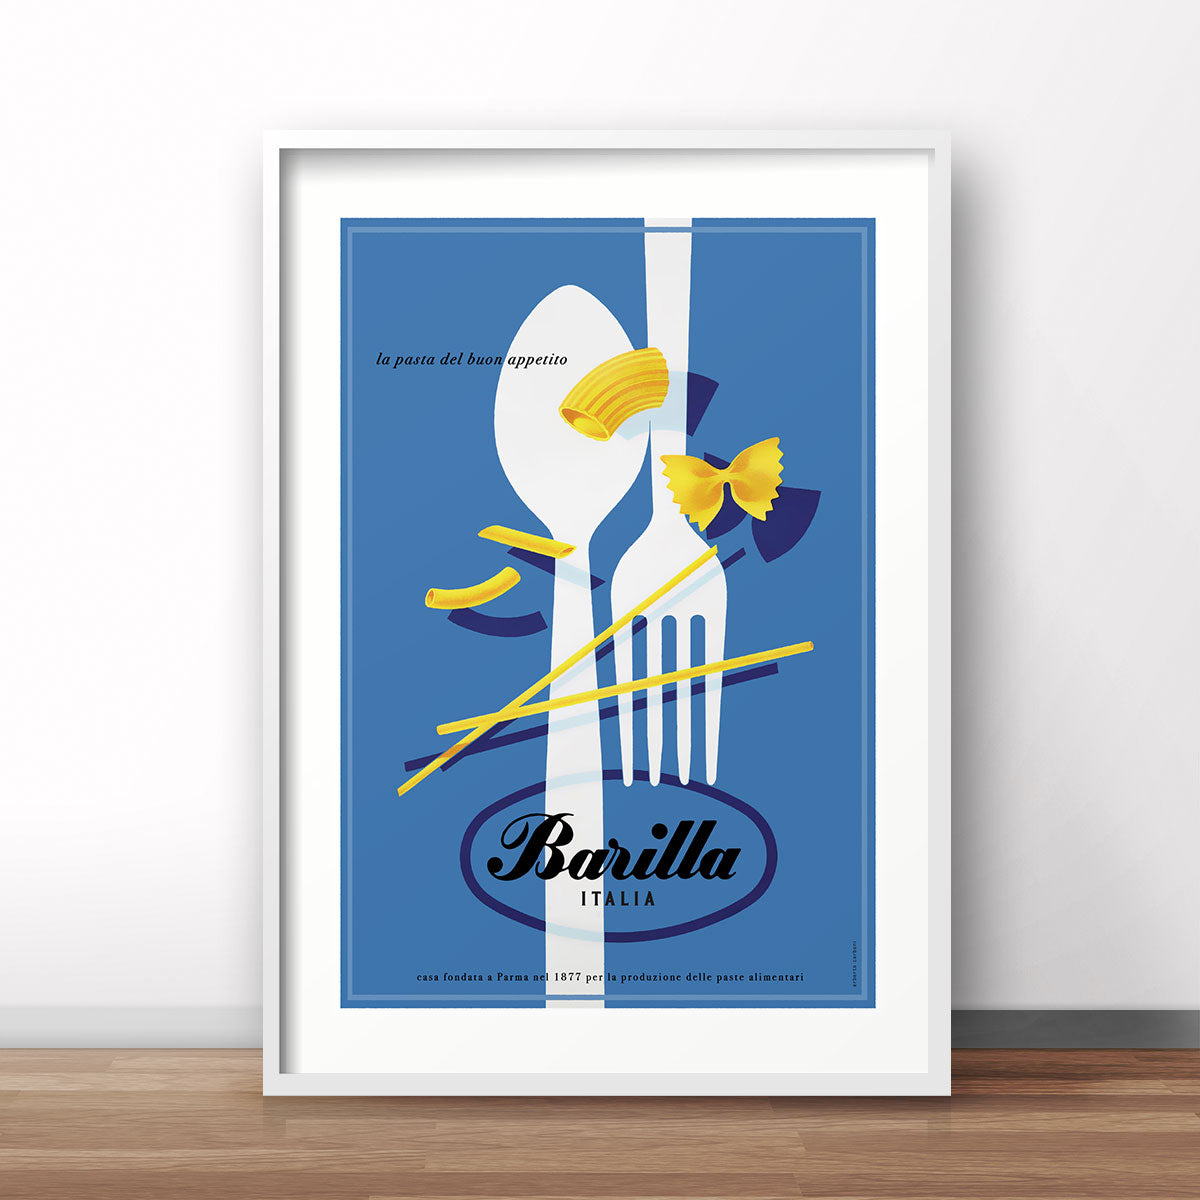 Italian pasta retro vintage advertising poster print from Places We Luv